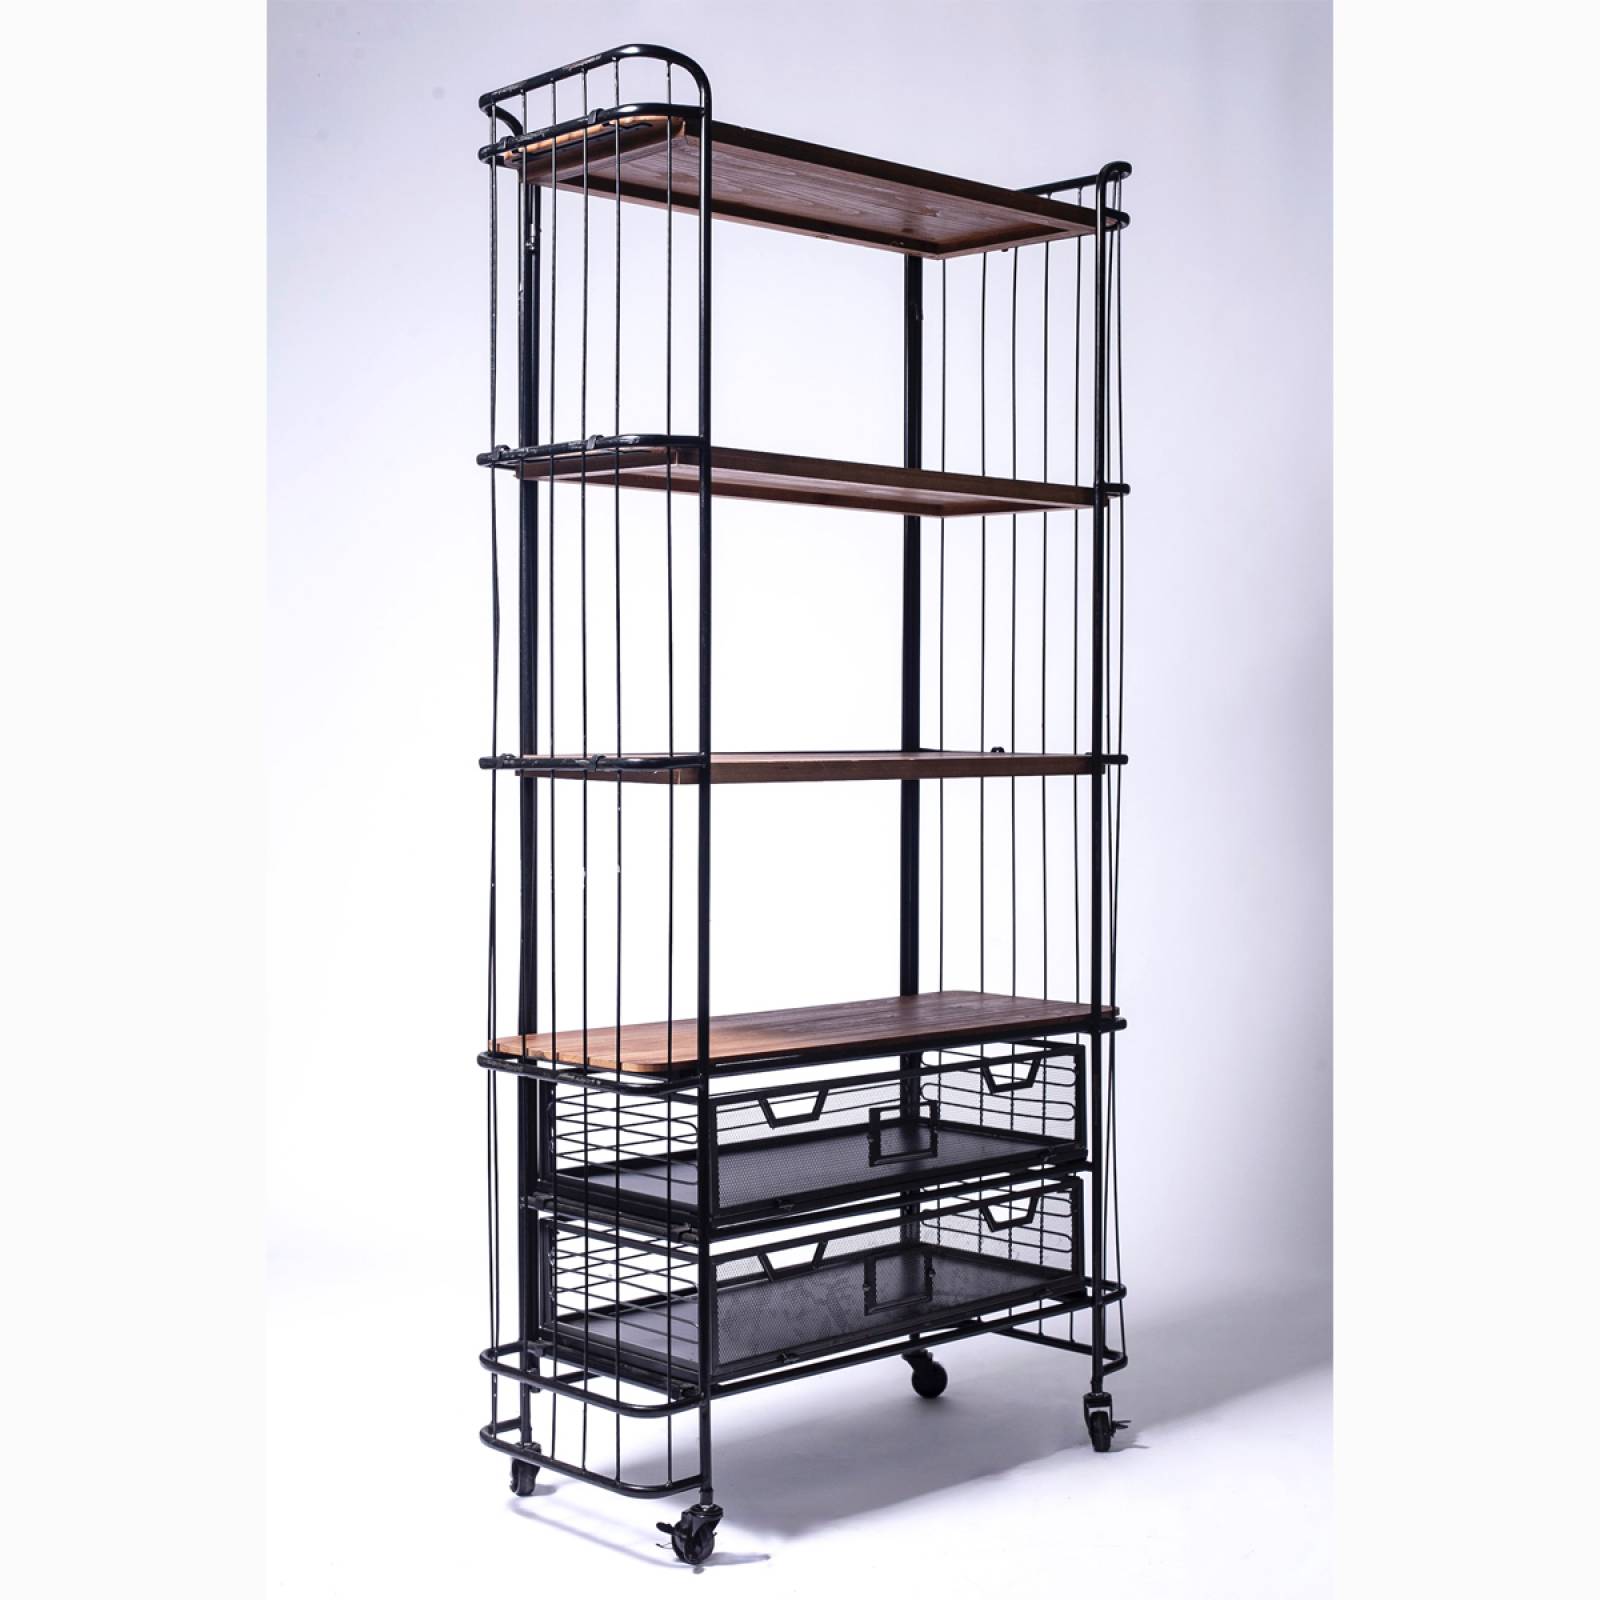 Wooden & Metal Shelving Unit With Drawers On Castors thumbnails